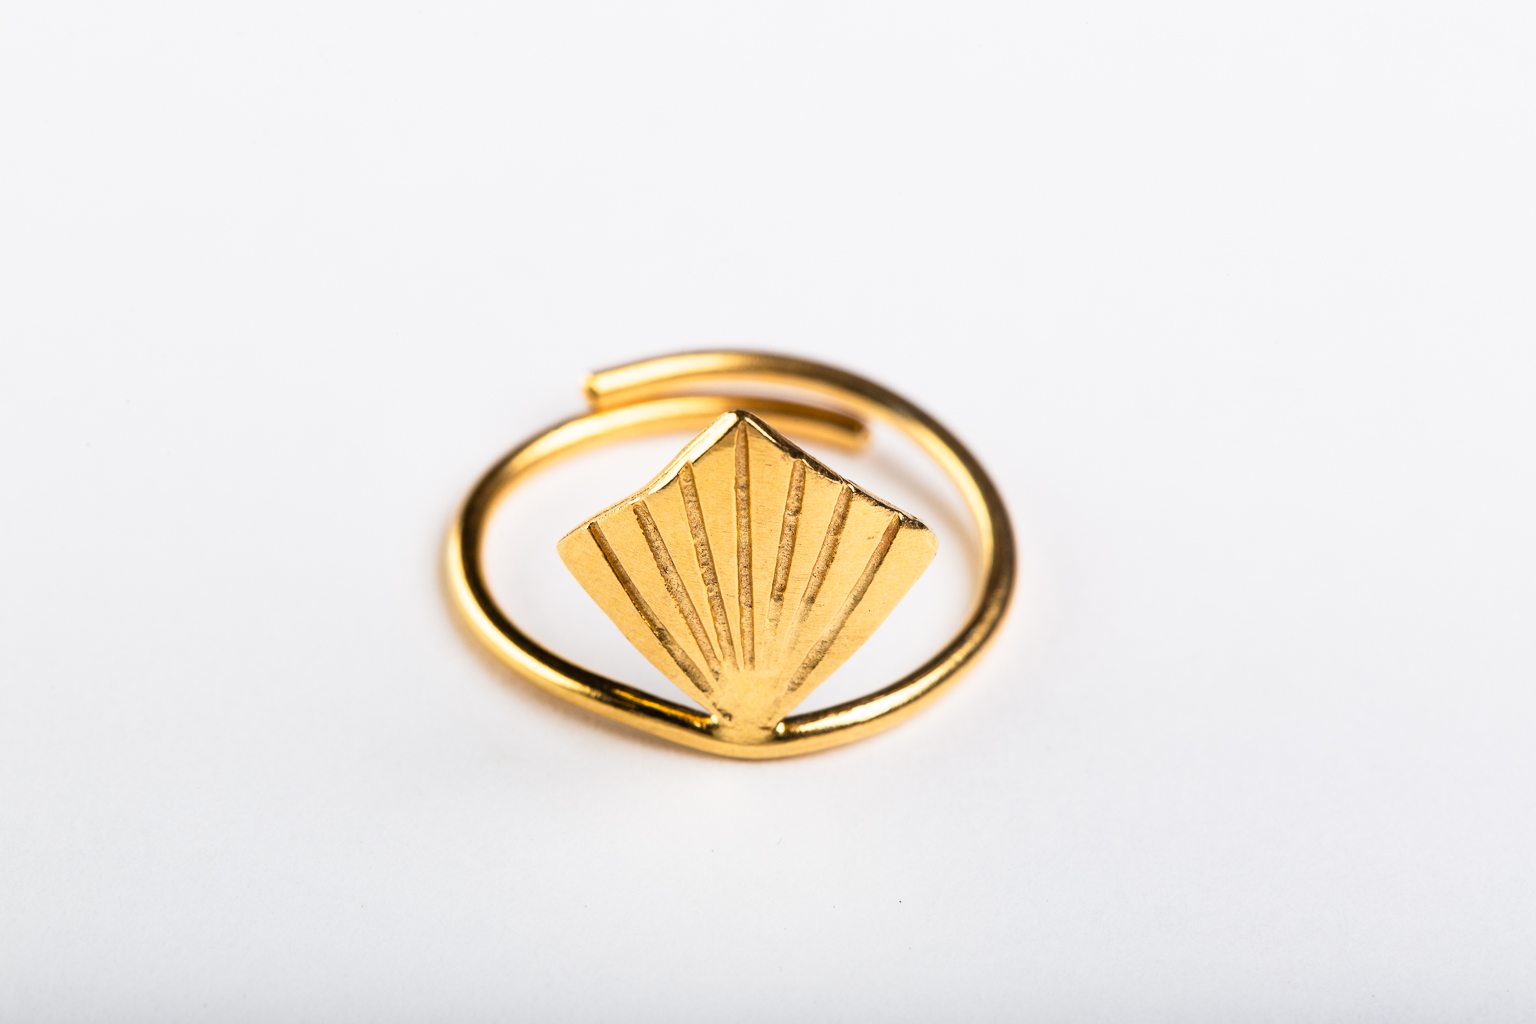 Gold-plated "Rhombus" ring